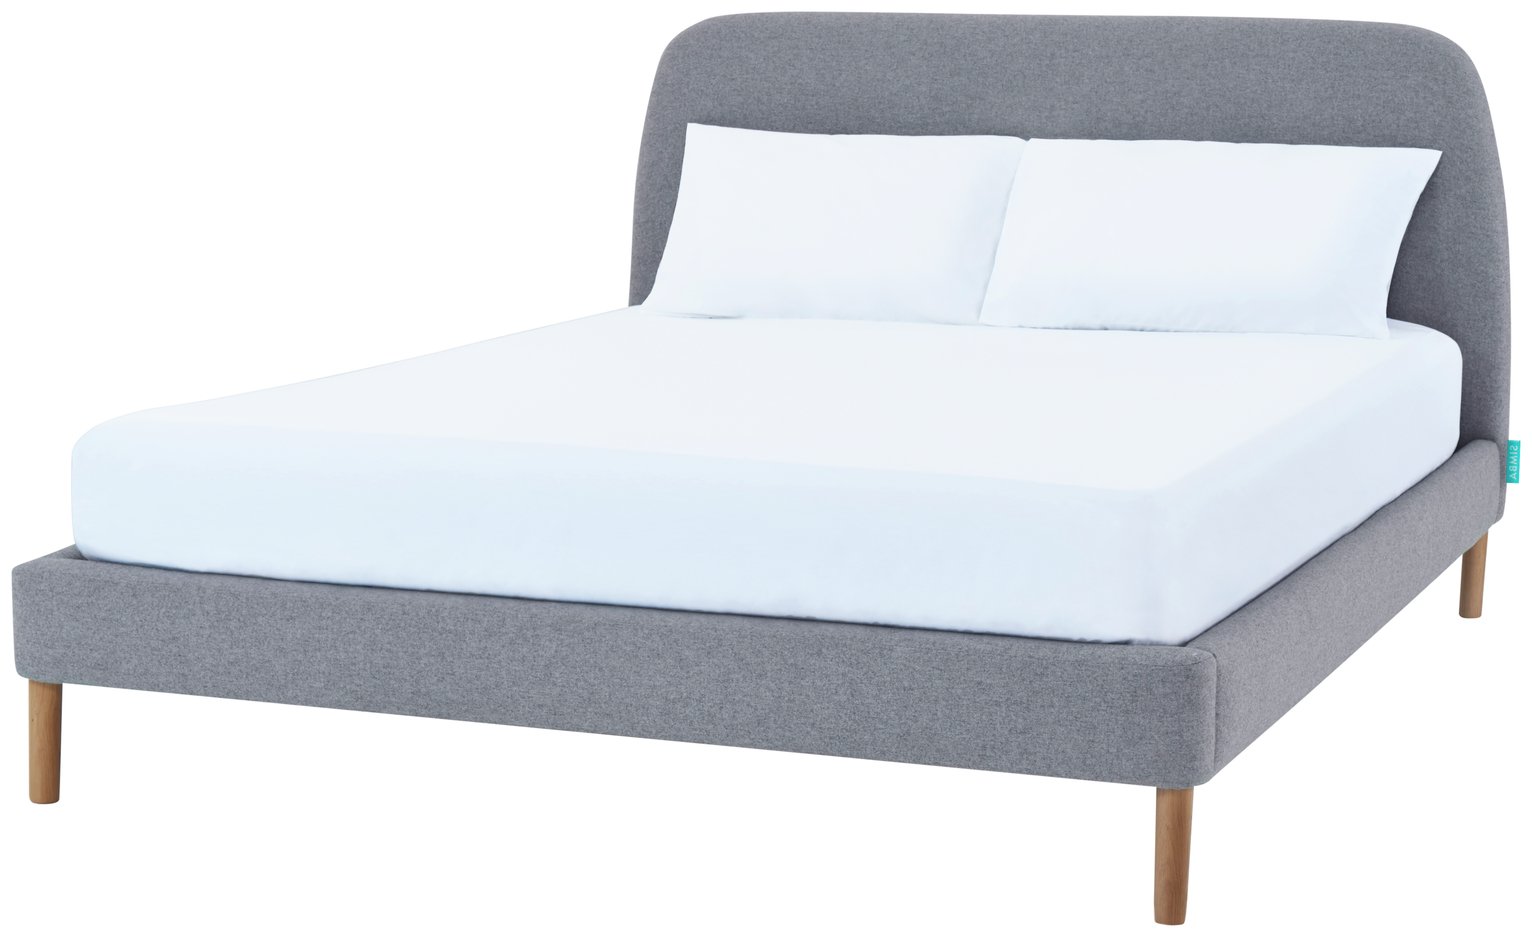 Simba Double Bed Frame and Headboard - Grey